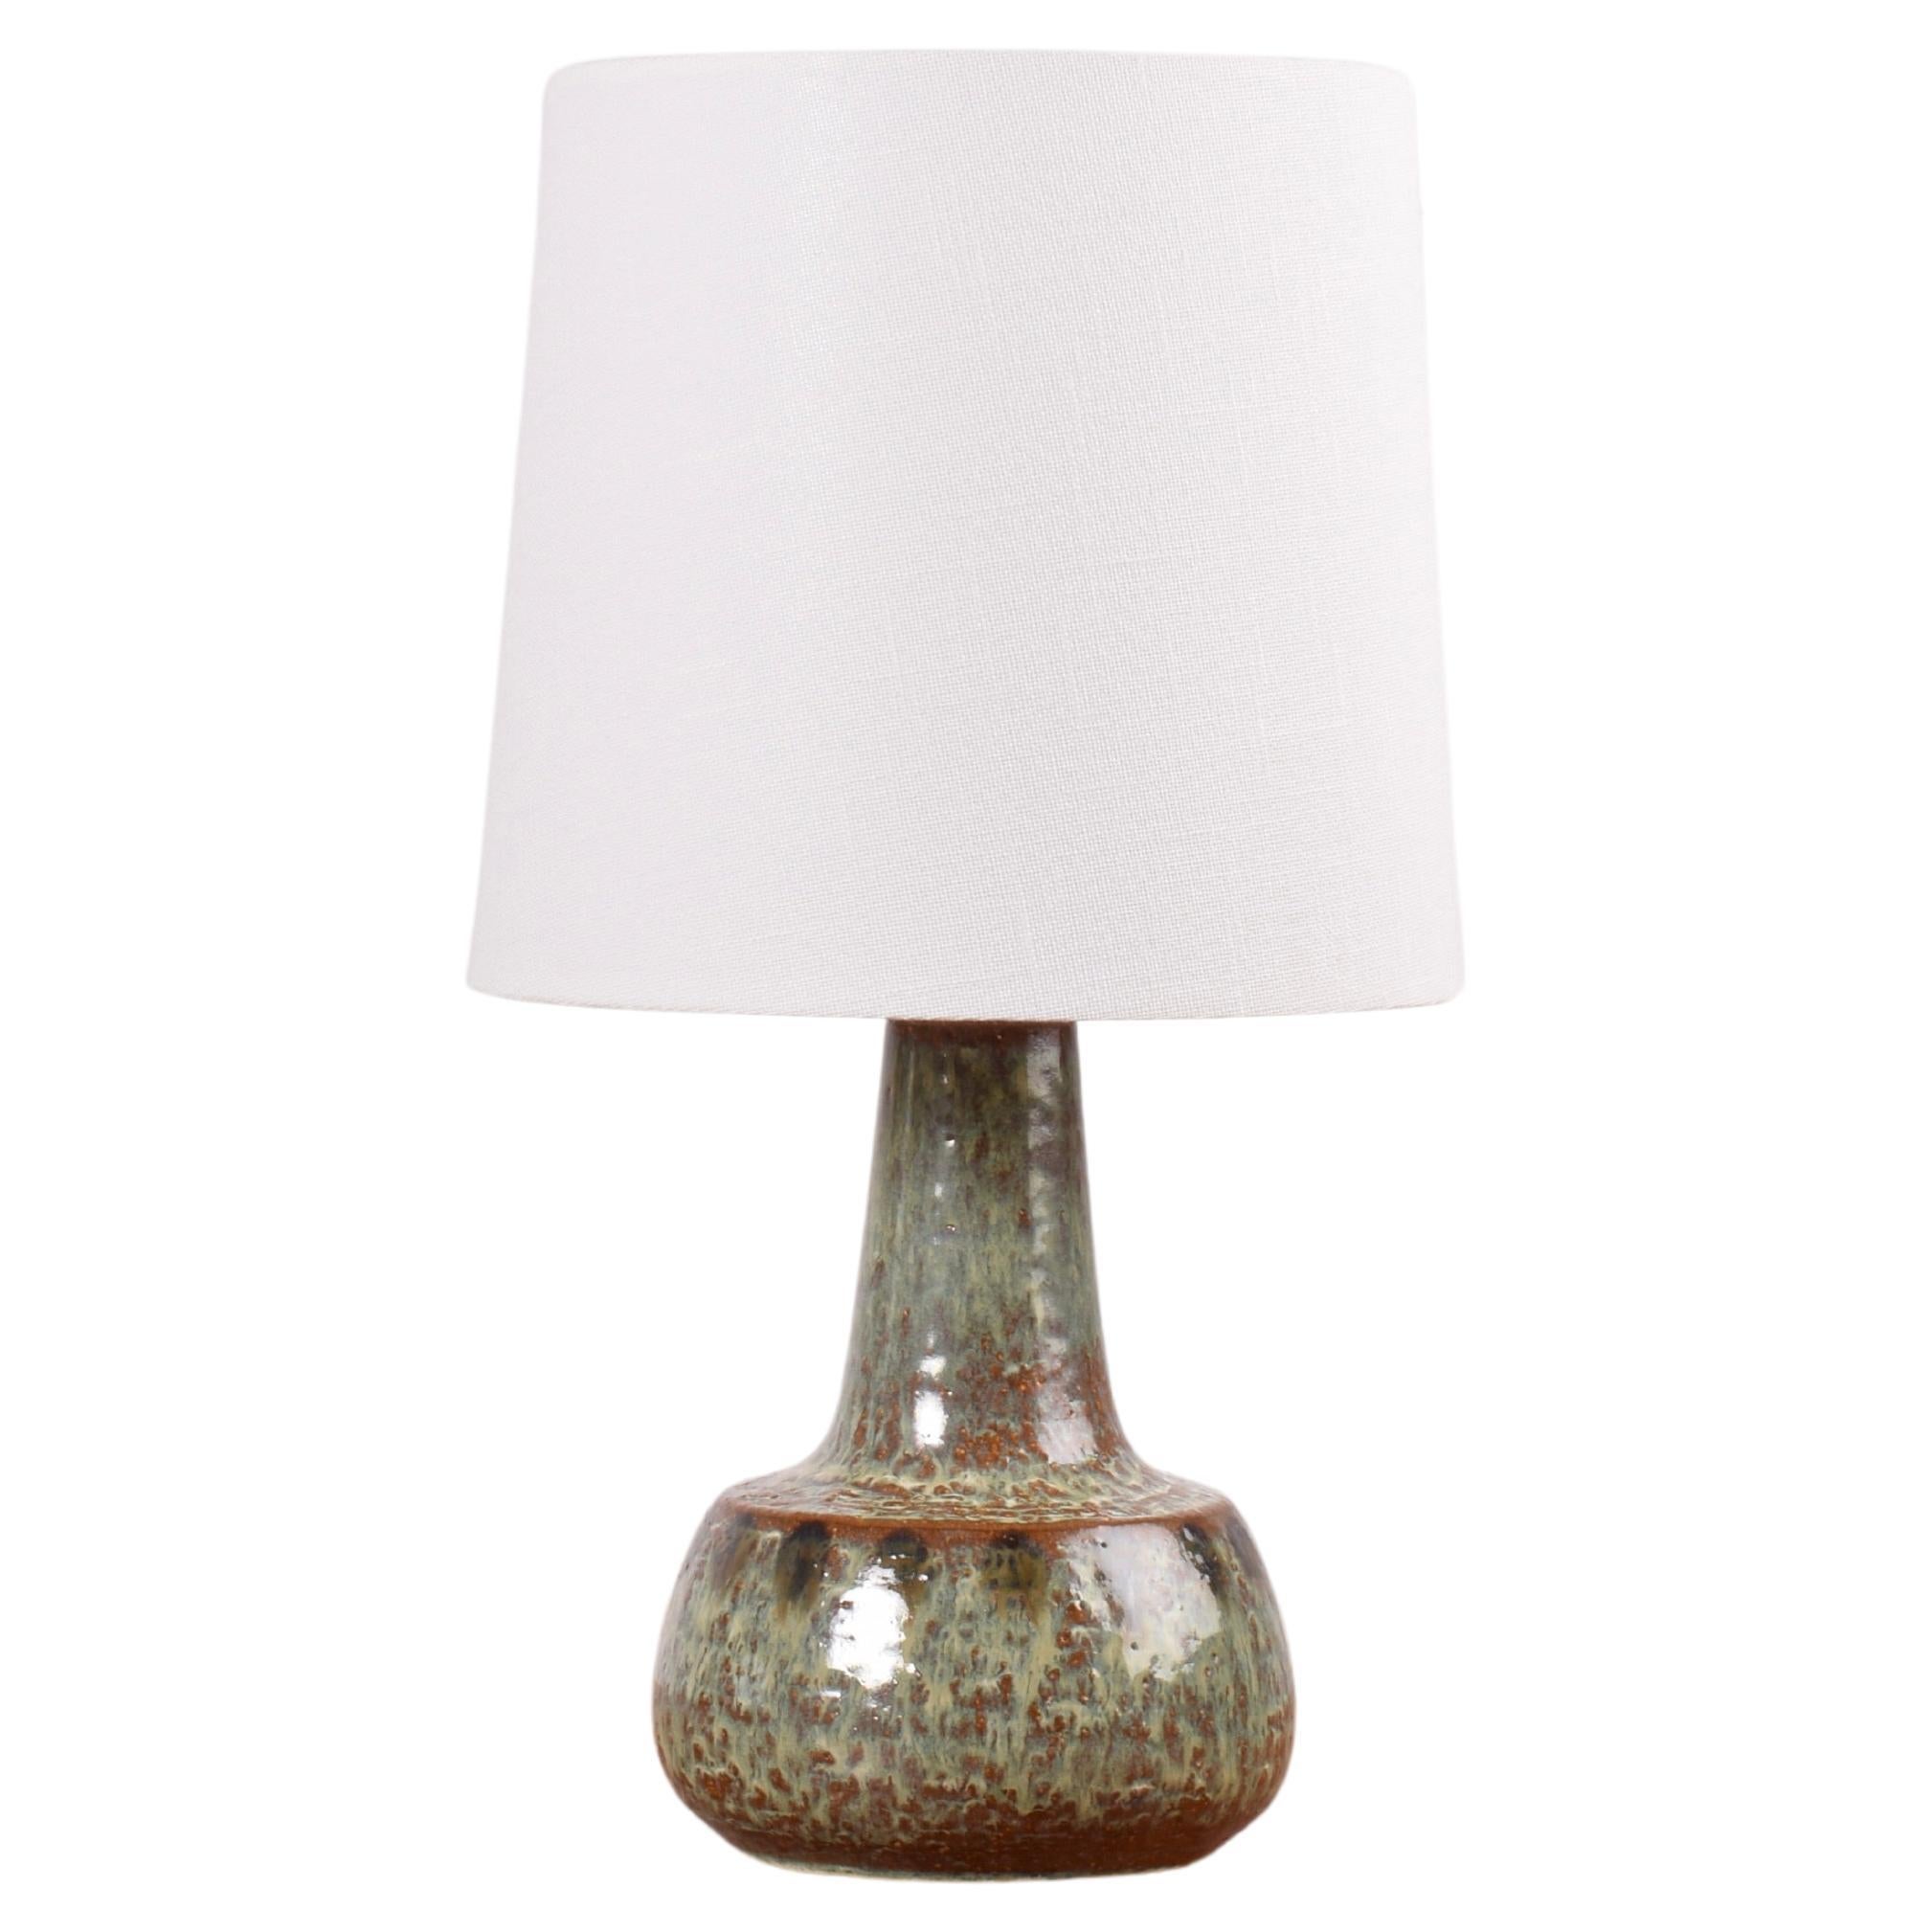 Søholm Small Ceramic Table Lamp with Brown and Green Glaze, Danish Modern 1960s For Sale